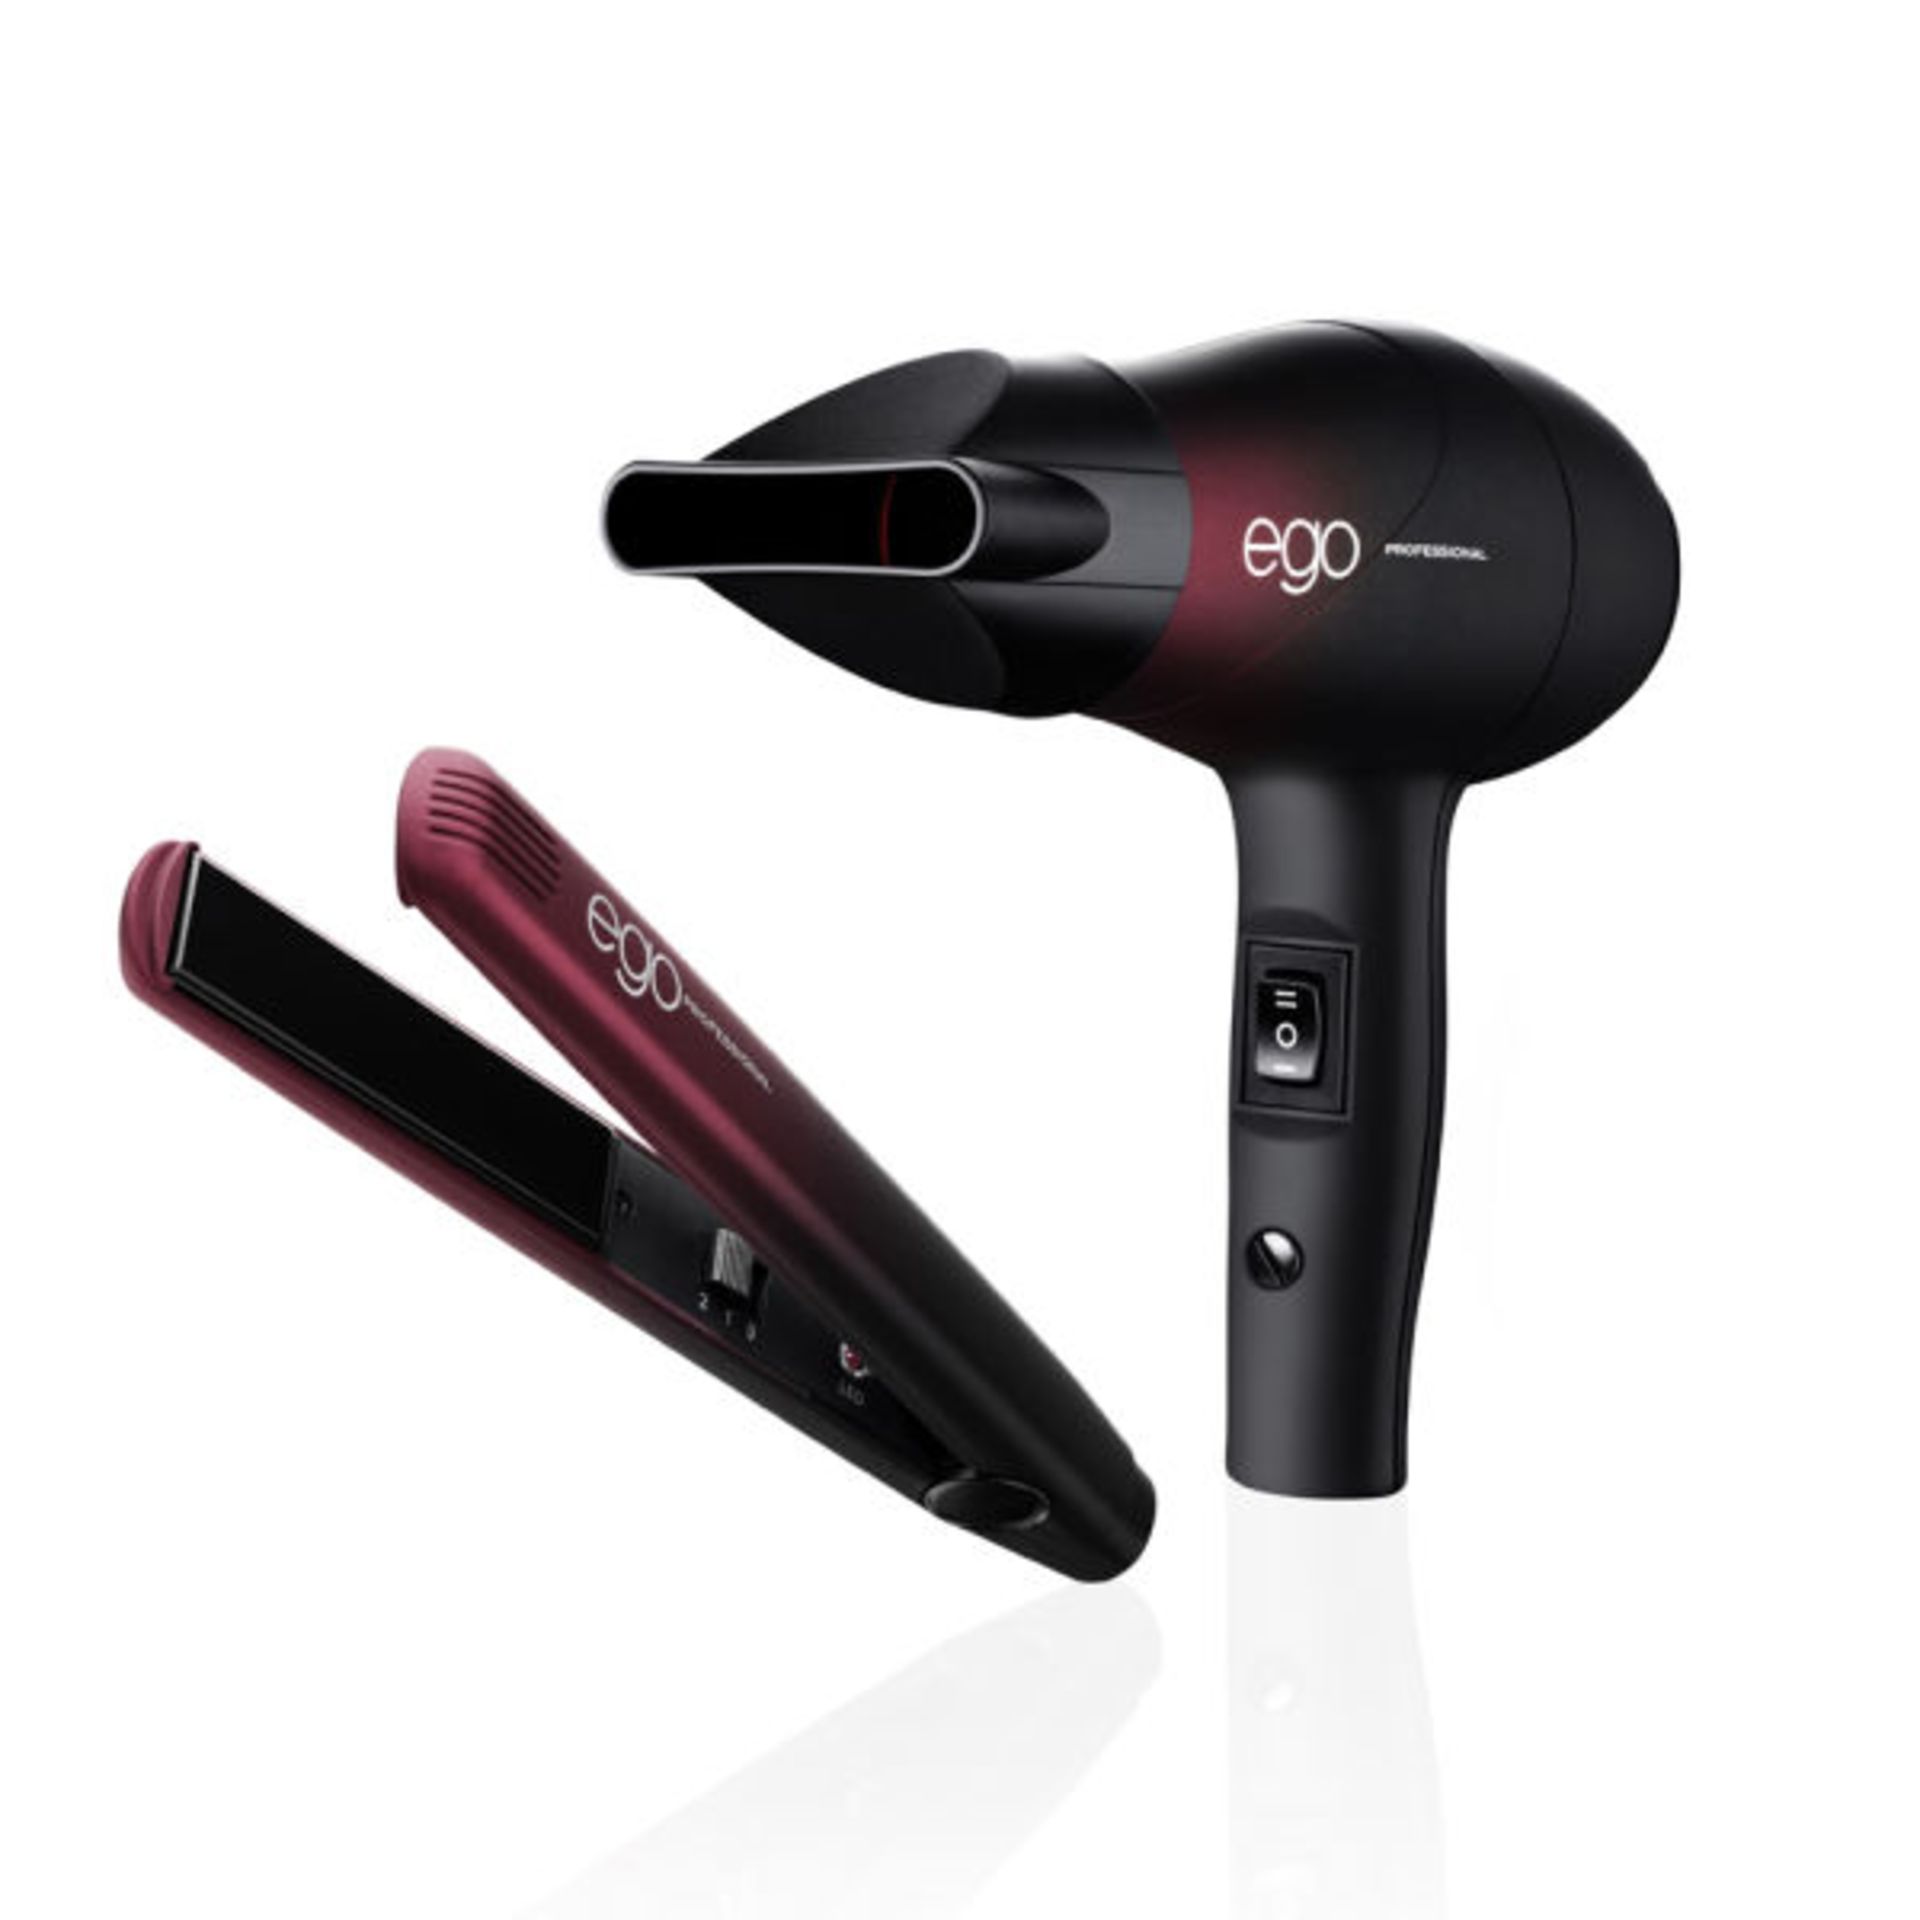 10 x Ego Professional Full On And Fabulous Ego Set (Alter Ego Hairdryer And Little Iron) [Grade A] - Image 4 of 4